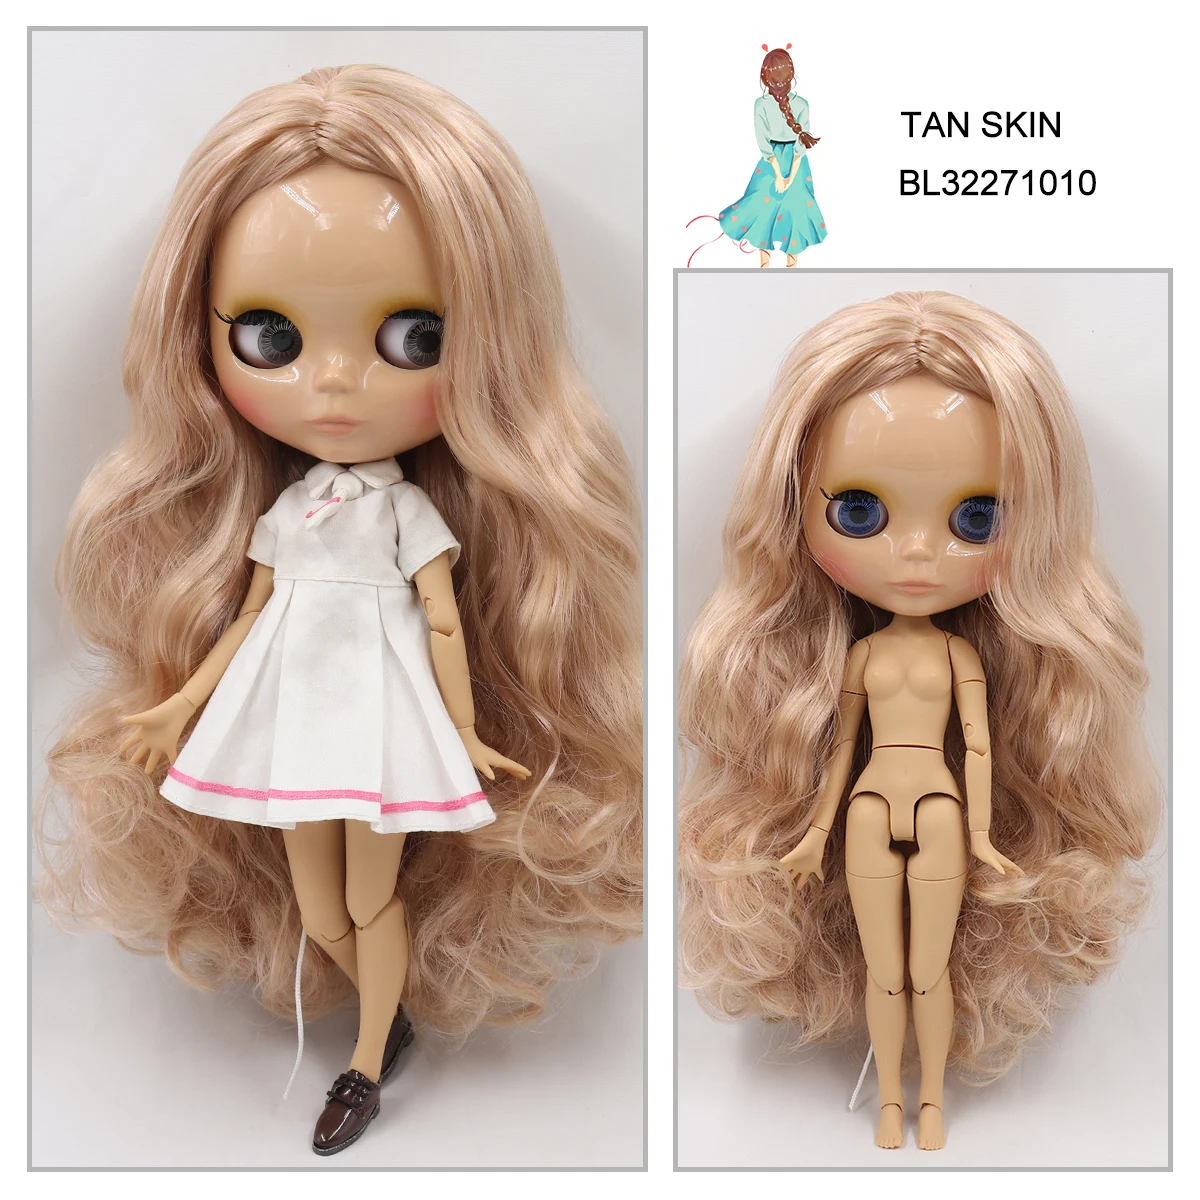 Neo Blythe Doll with Pink Hair, Tan Skin, Shiny Face & Factory Jointed Body 1